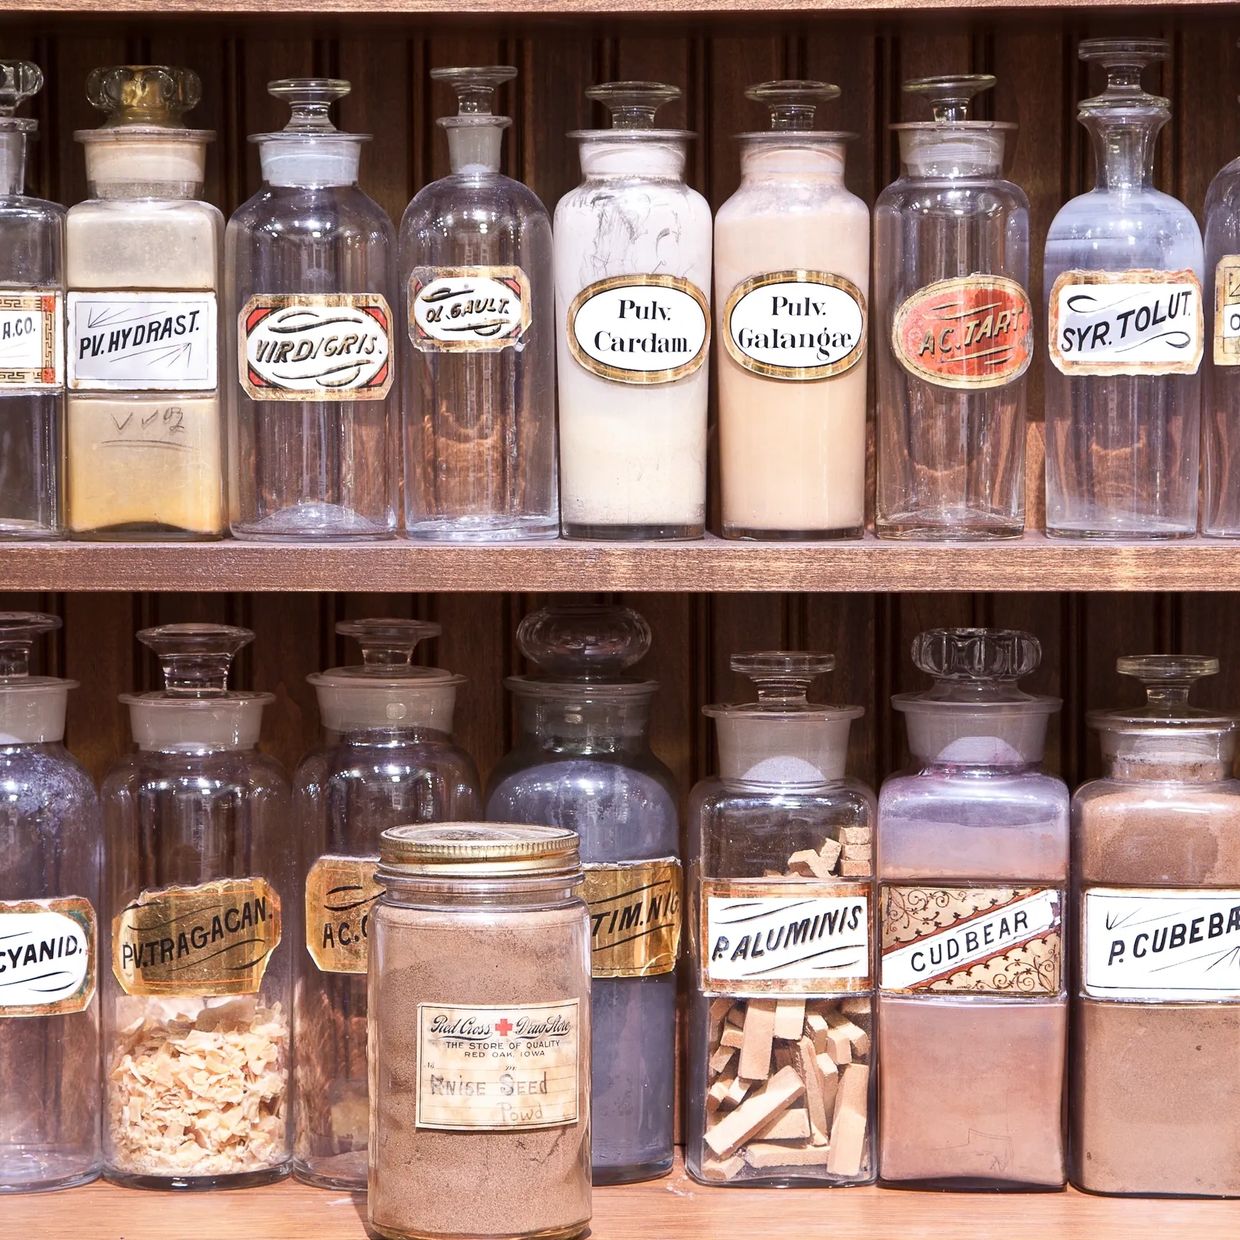 The Ouray Alchemist Pharmacy Museum is a must-see when in the Ouray area.  Take a guided tour back i